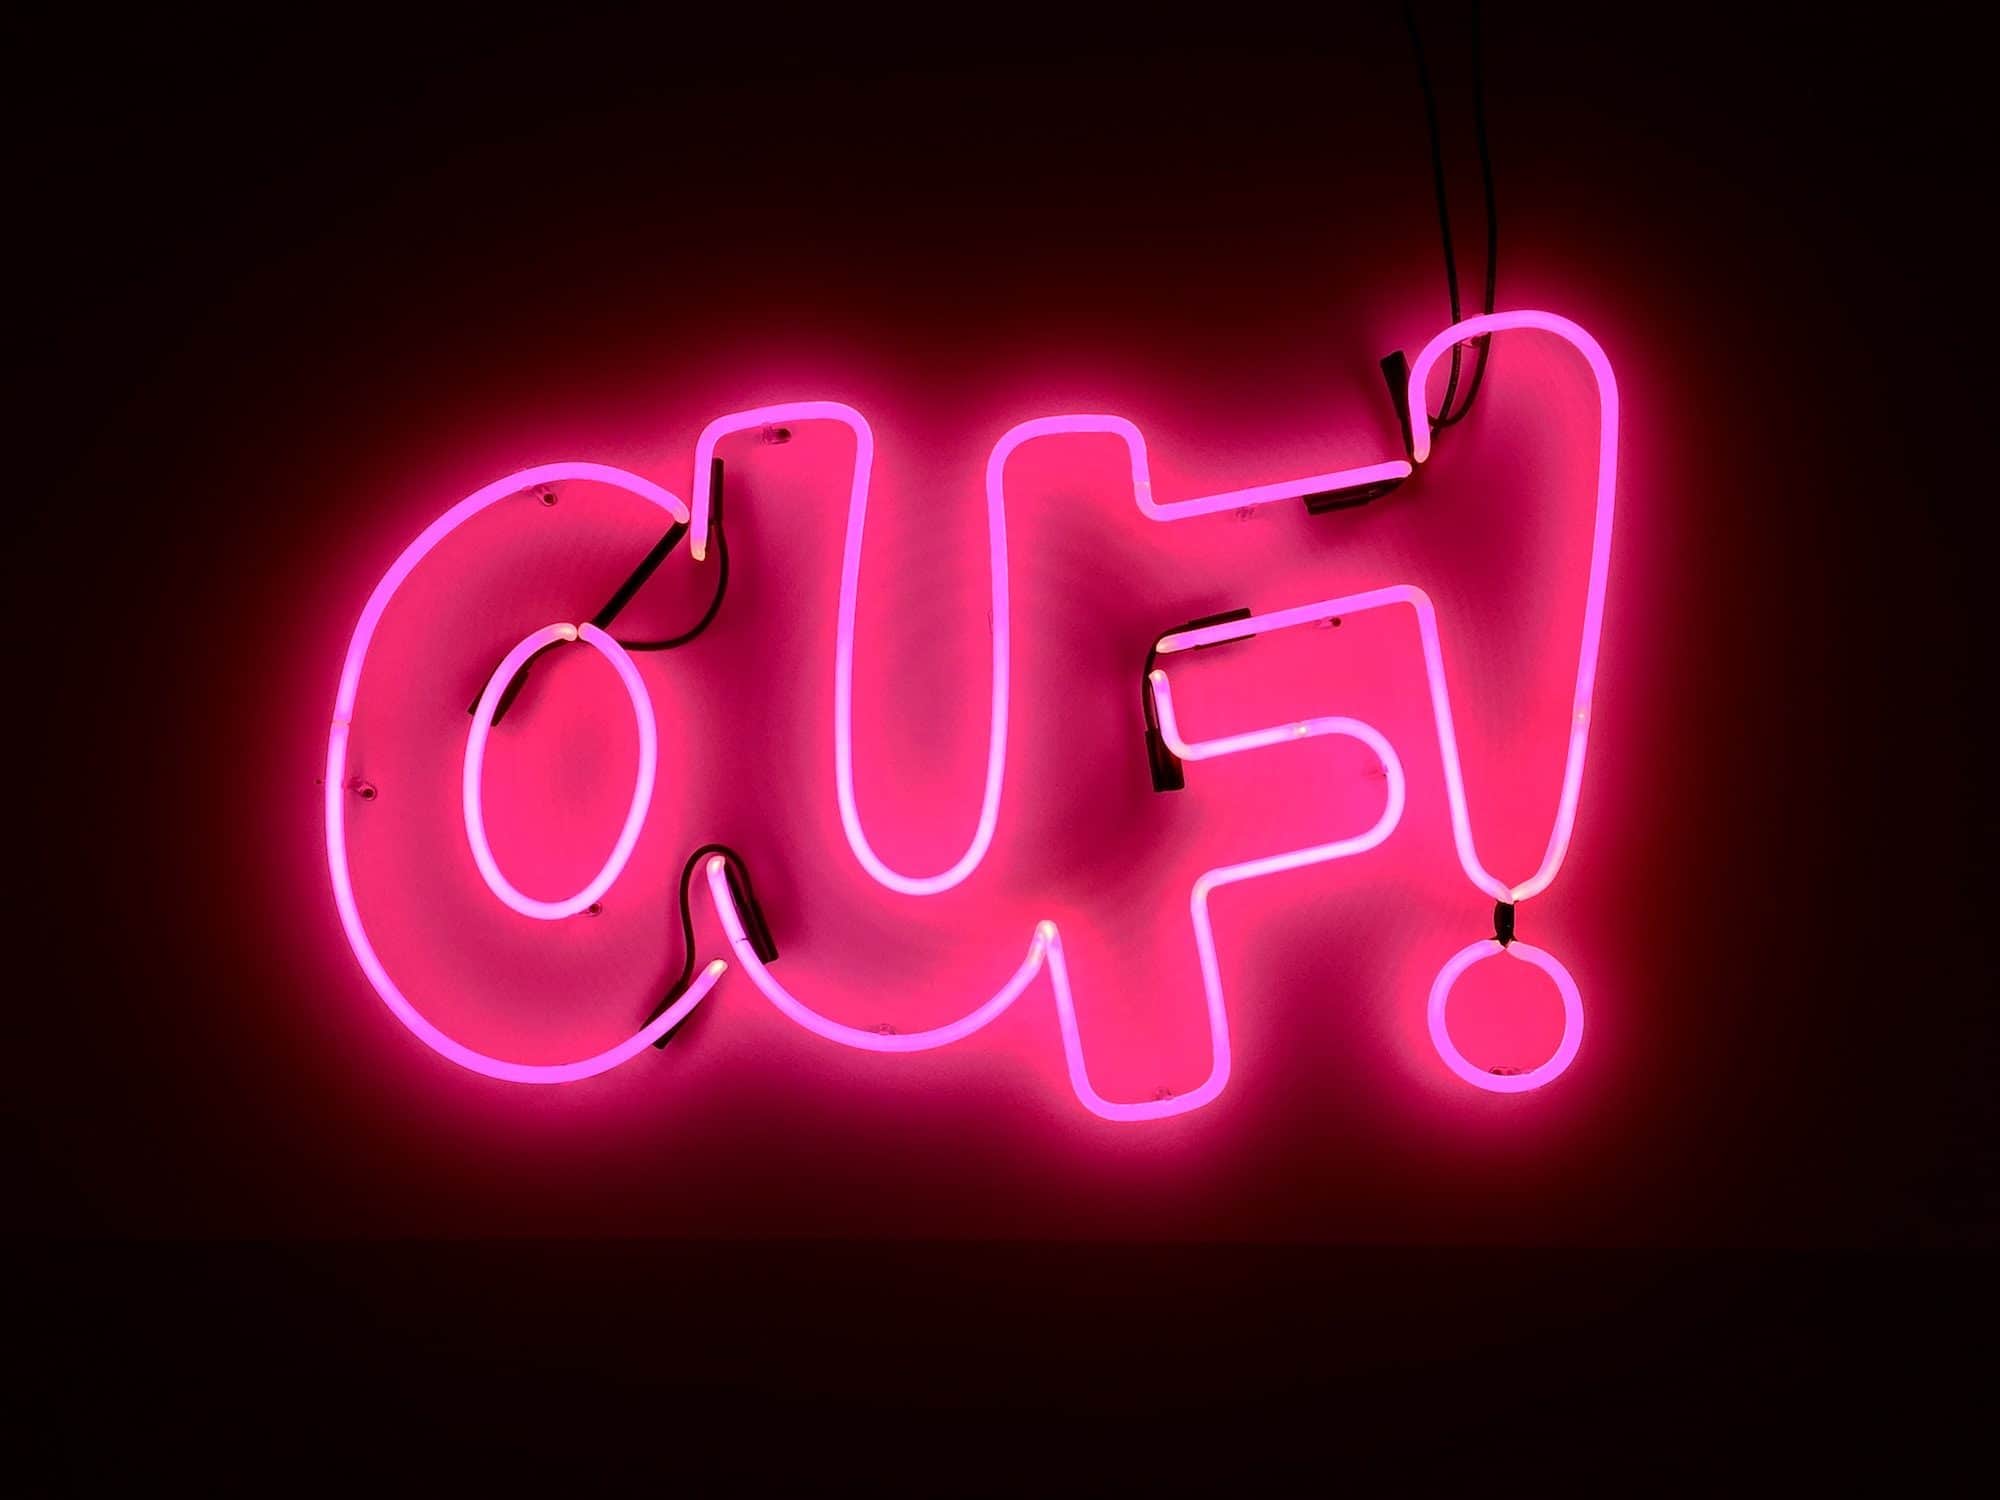 HiP Paris Blog writer gives you her tips to fast-track your French so you can read neon signs at art exhibitions like this 'ouf!' (meaning 'phew' or 'crazy', in English).